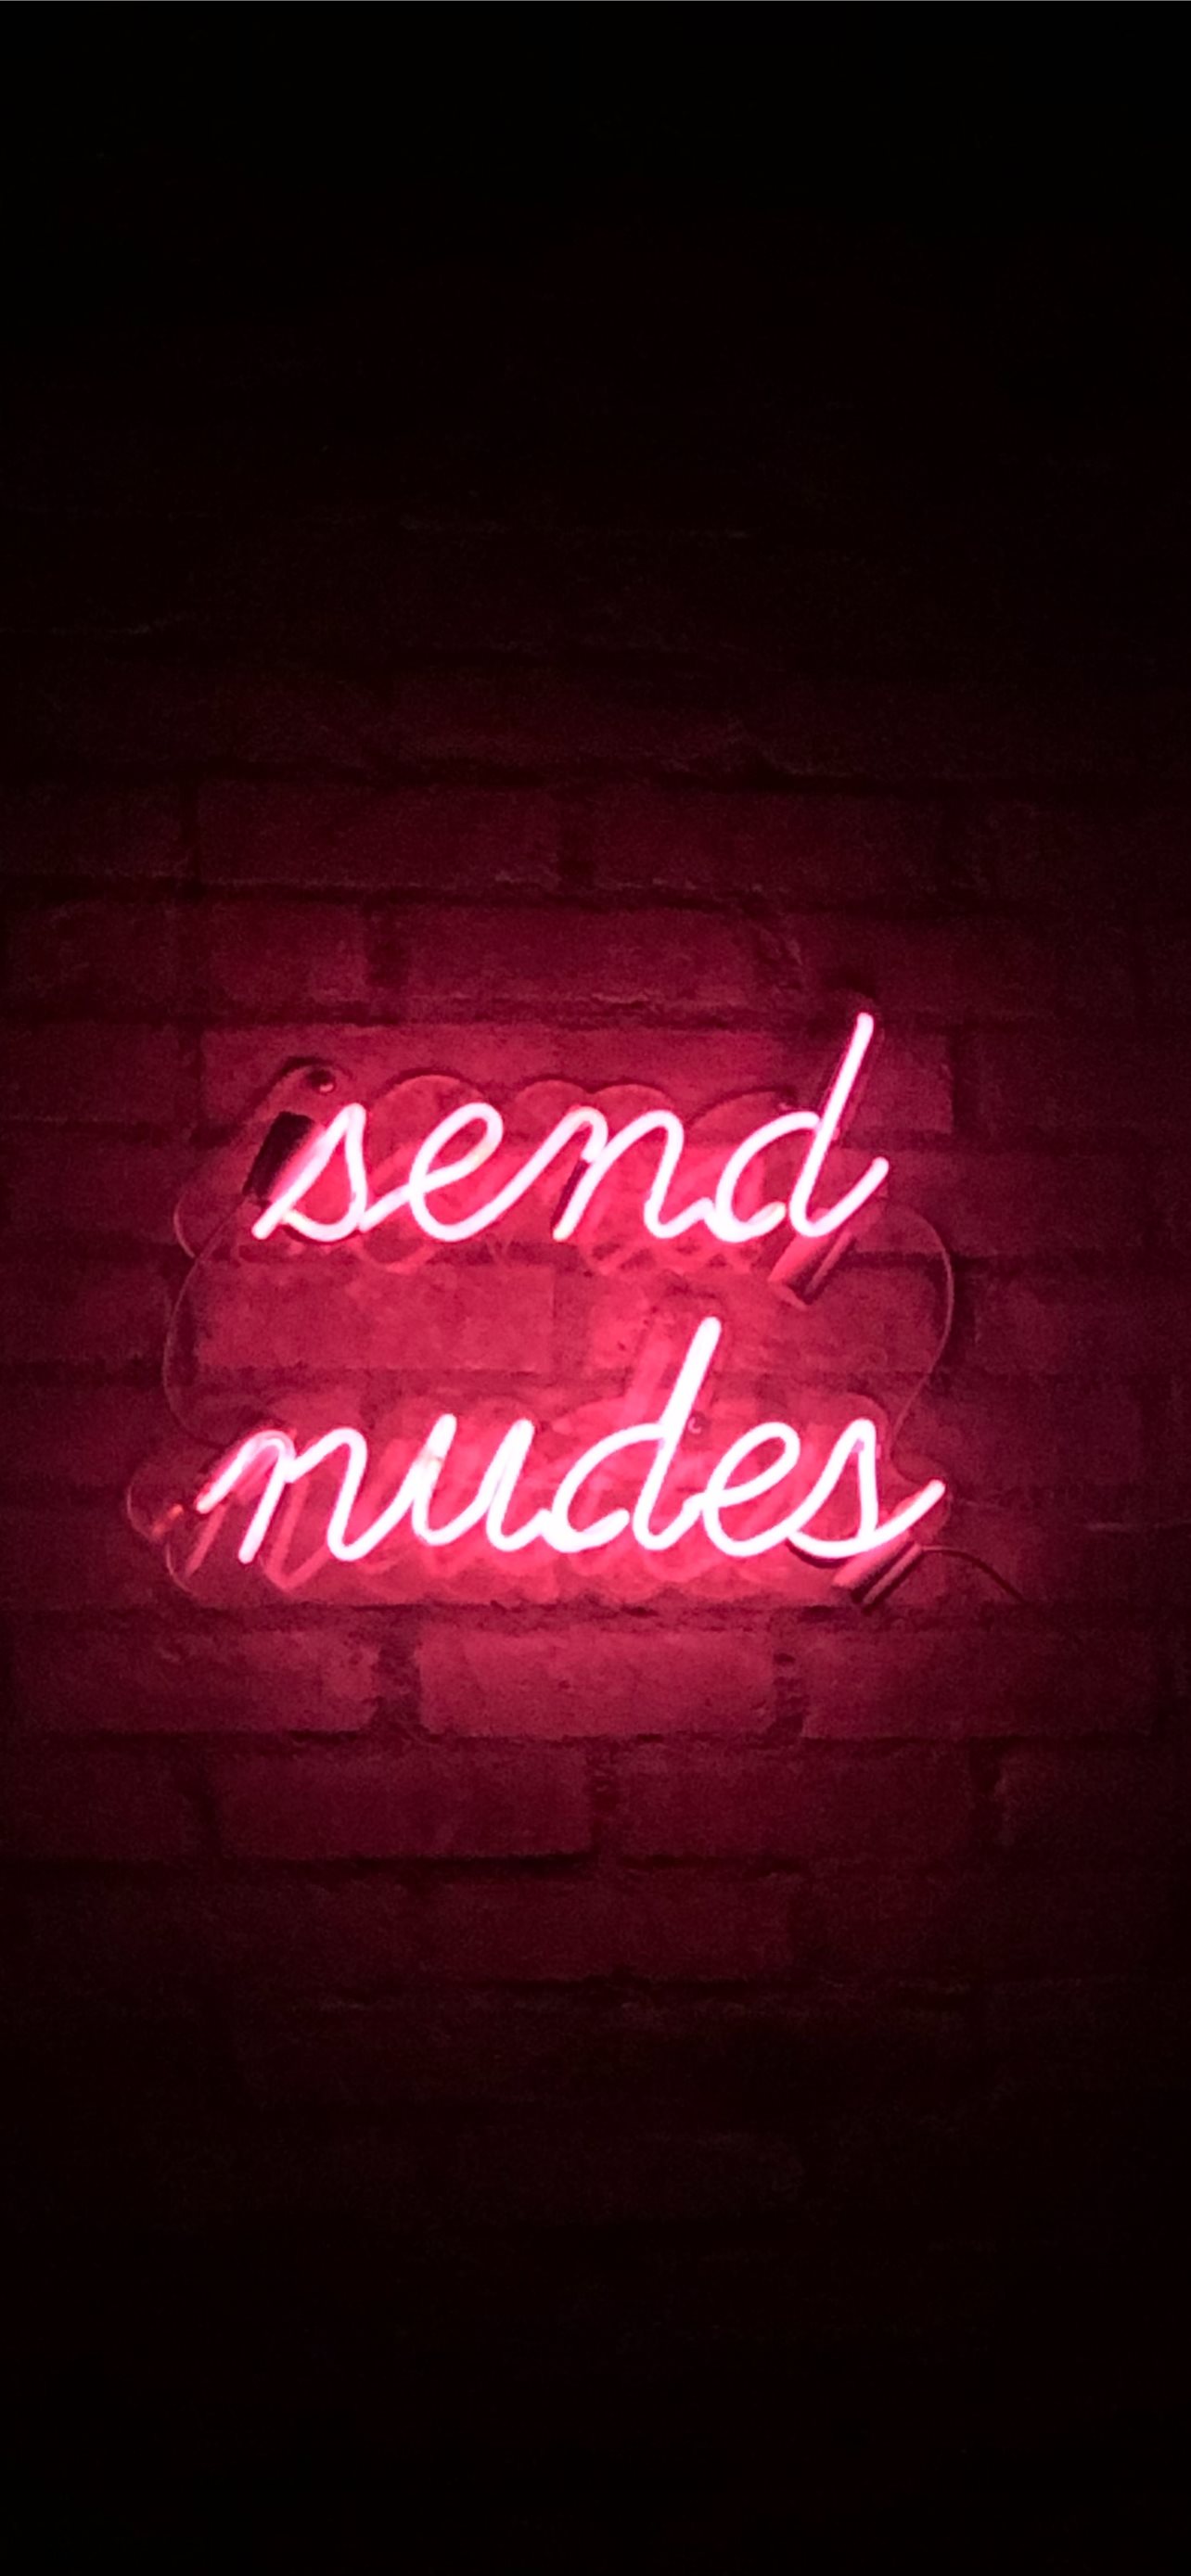 send nudes neon signage iPhone Wallpapers Free Download